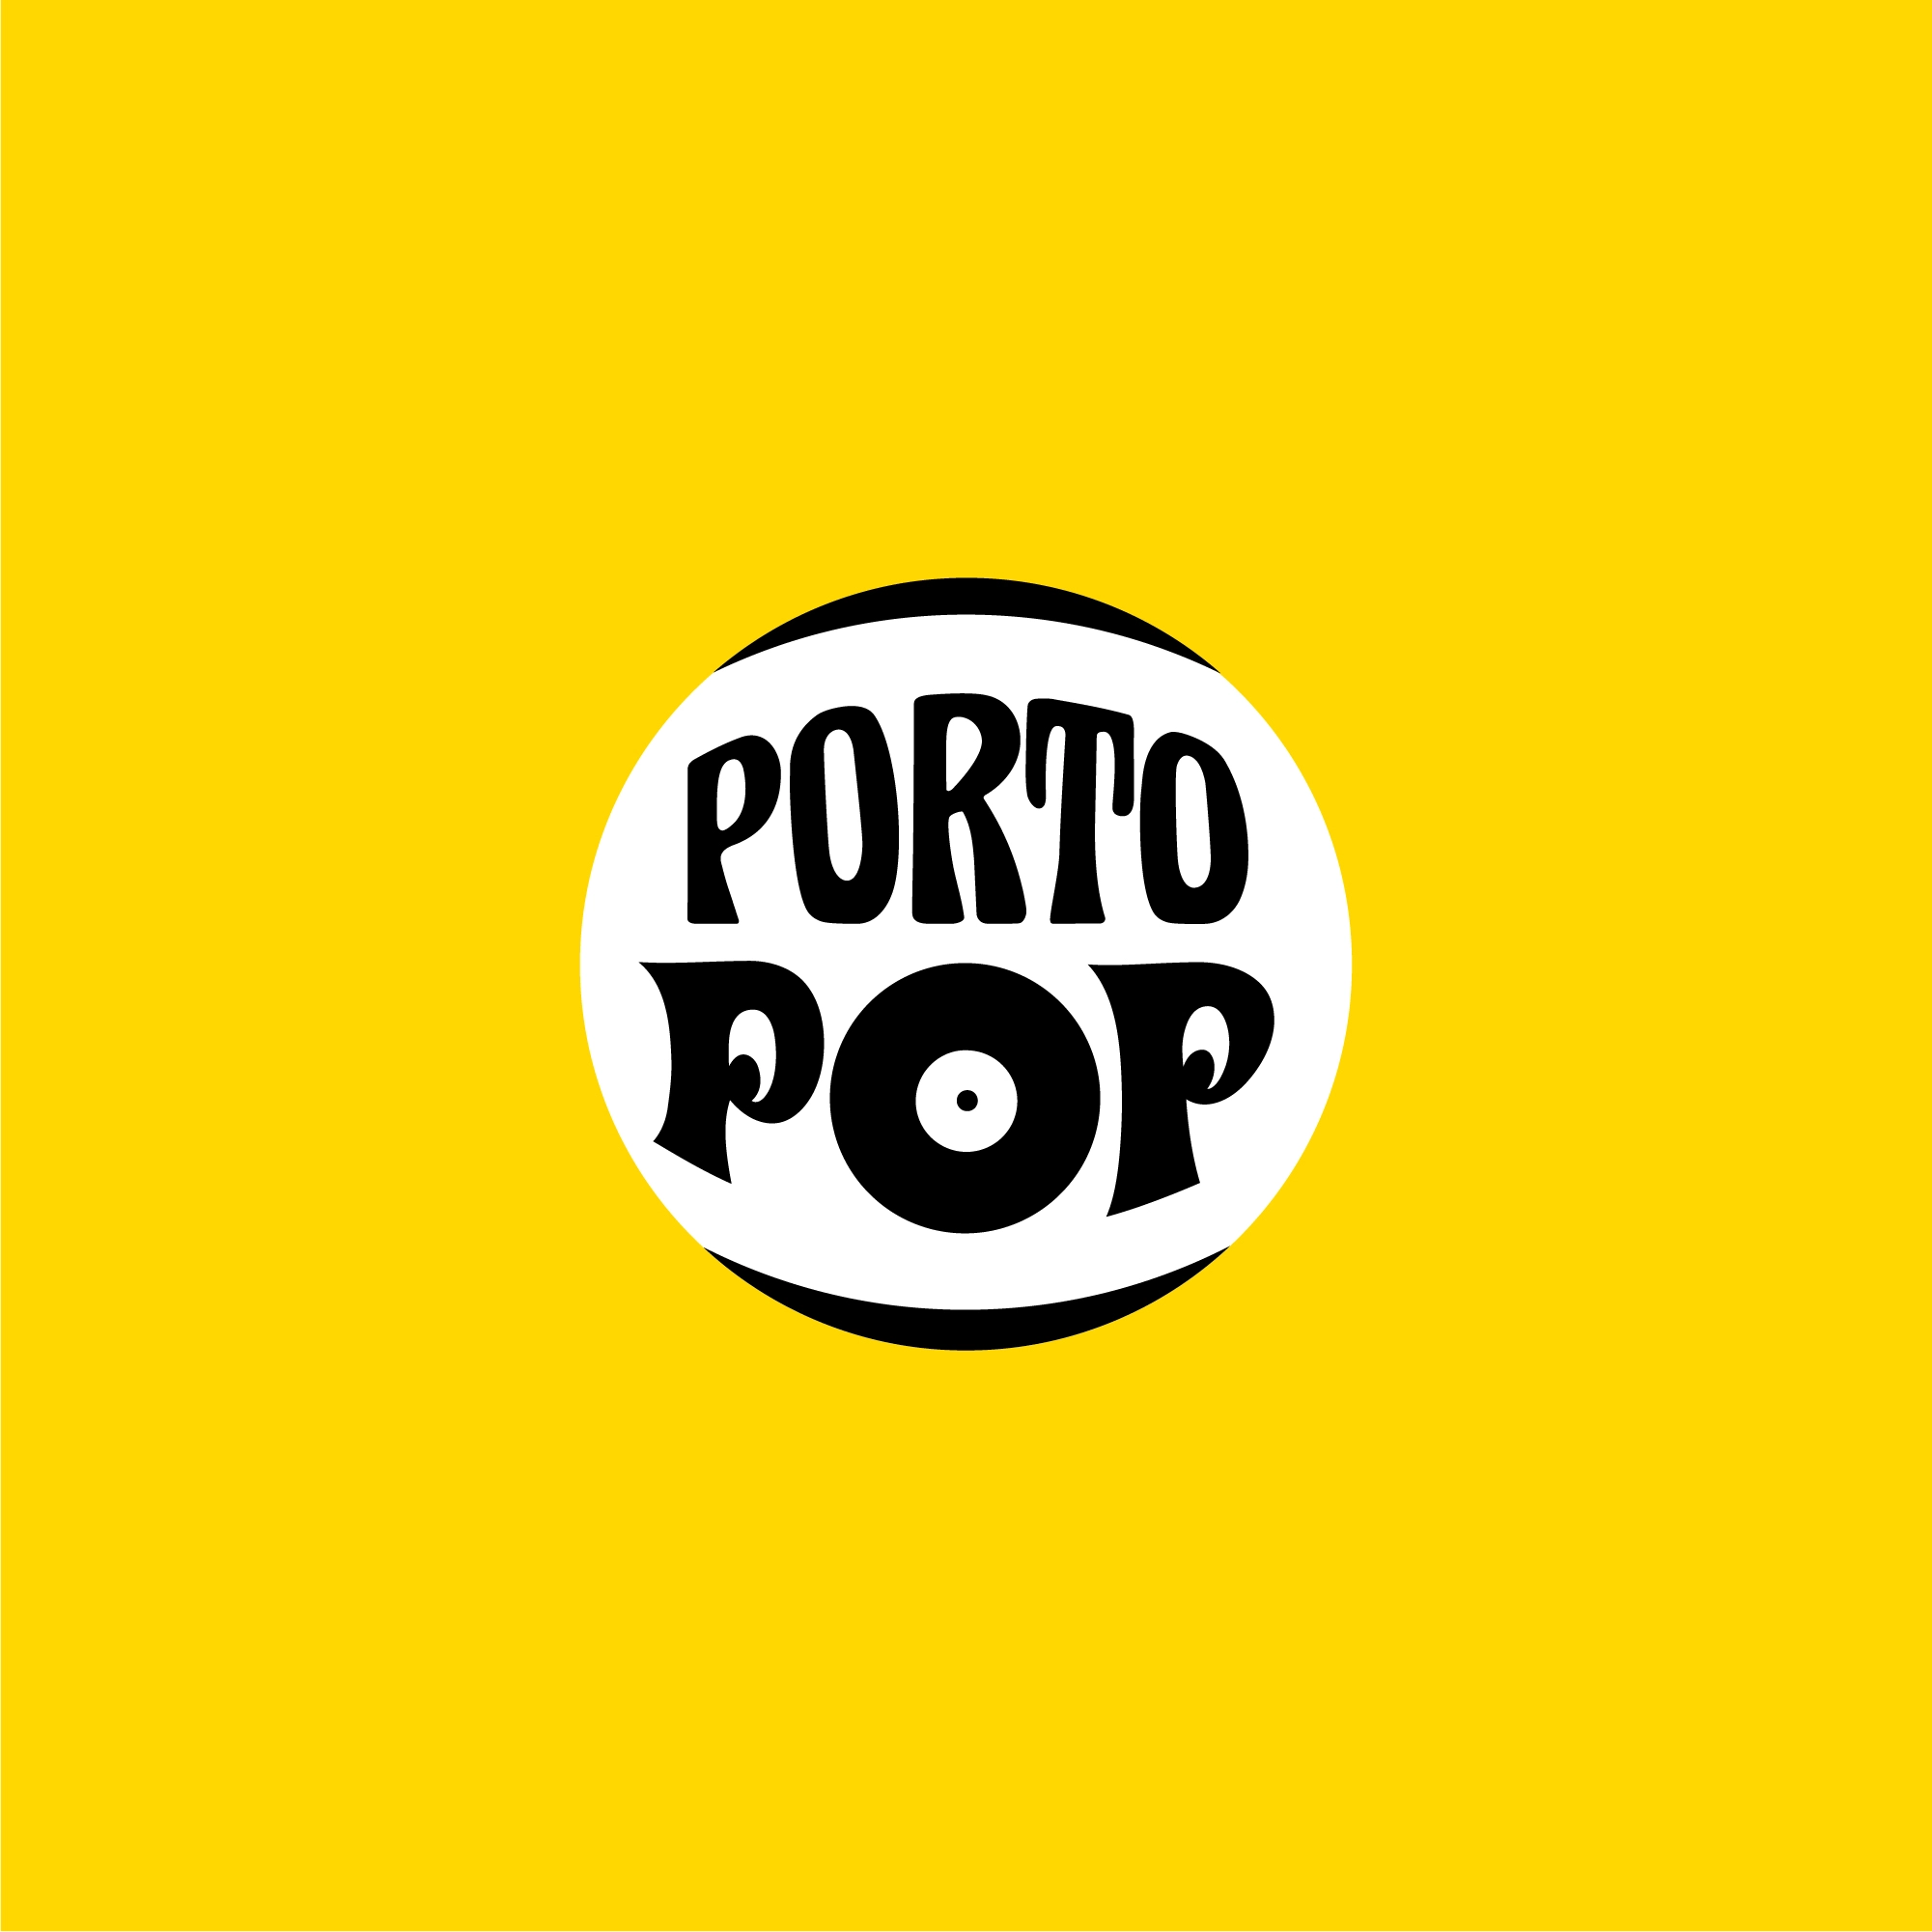 Funky and vintage logo design, based on rock cds, pop art, logo design for Porto pop in black, white and yellow